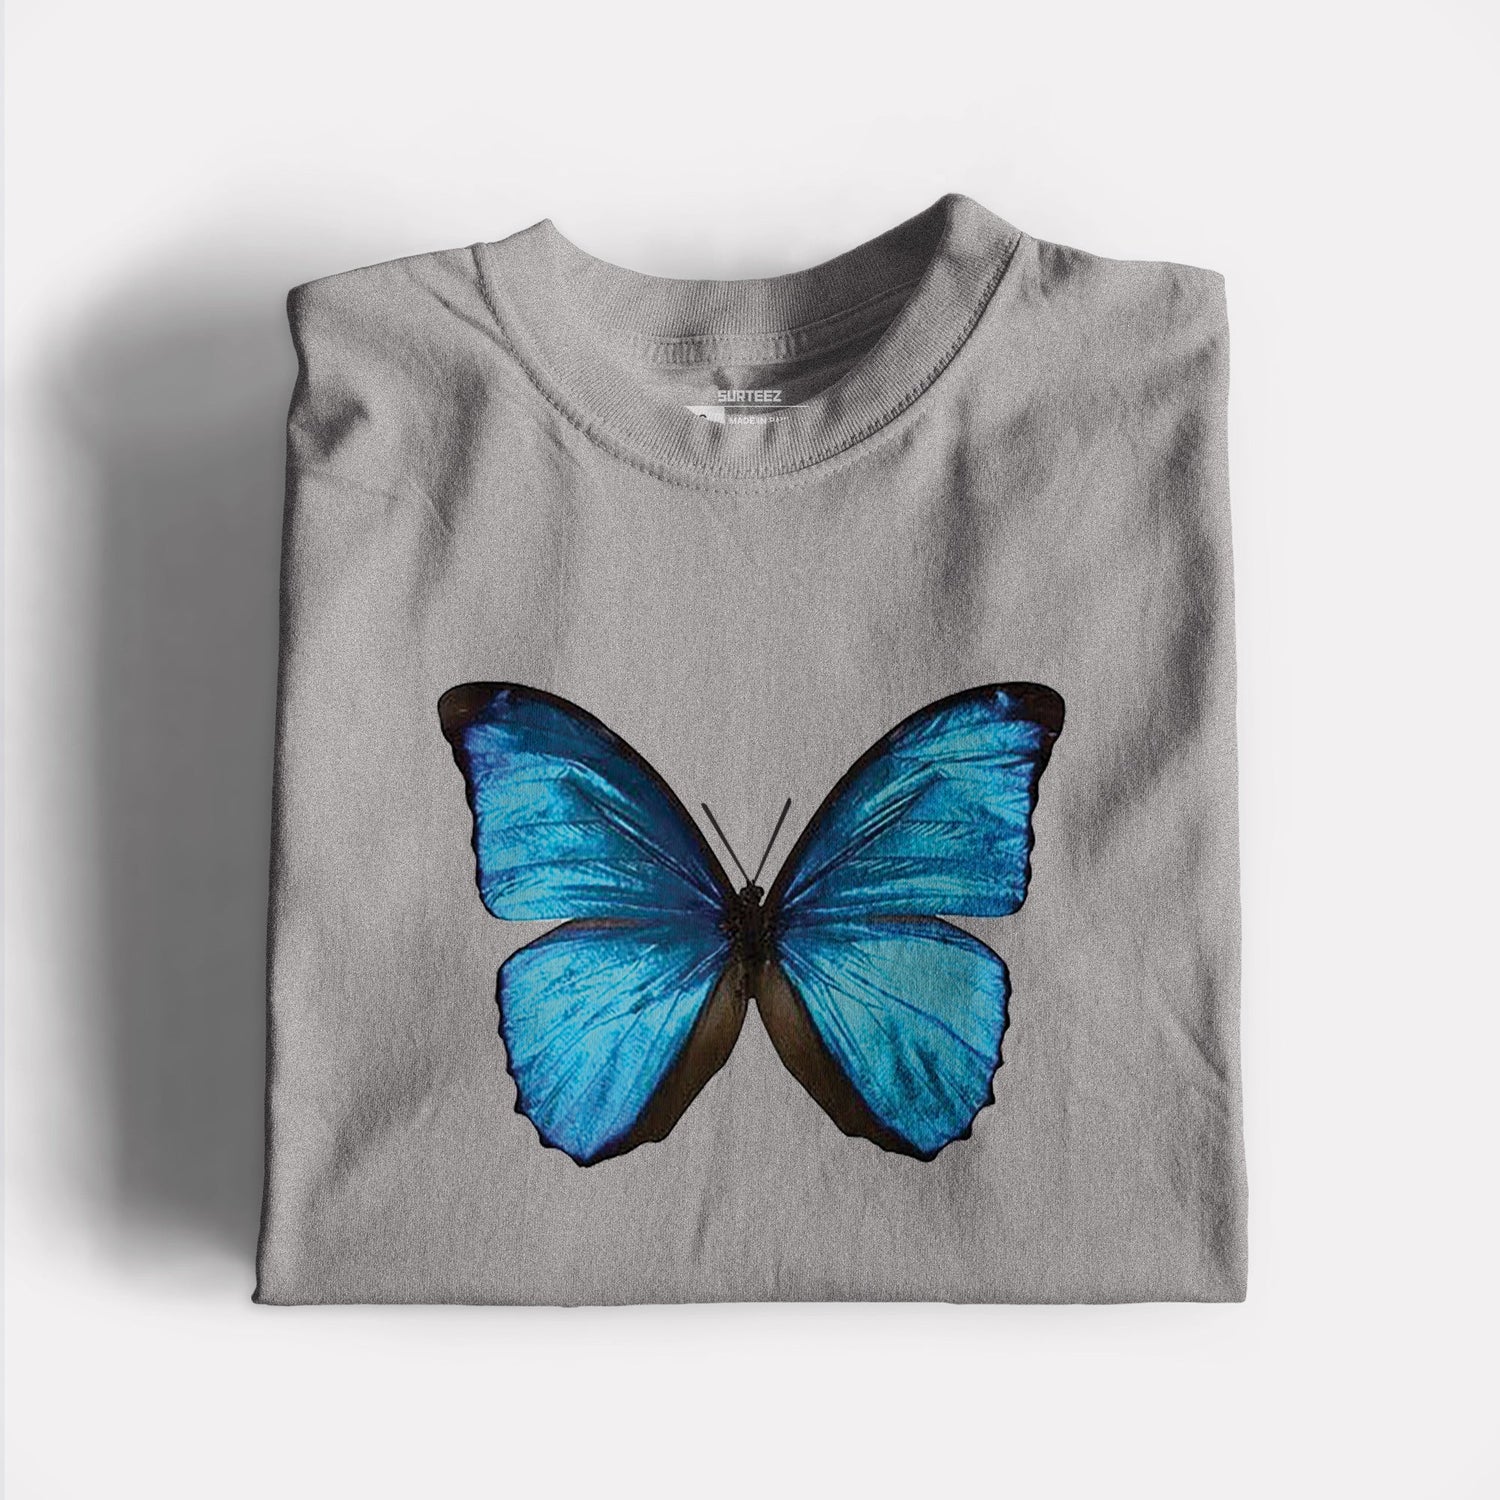 Butterfly Graphic Tshirt